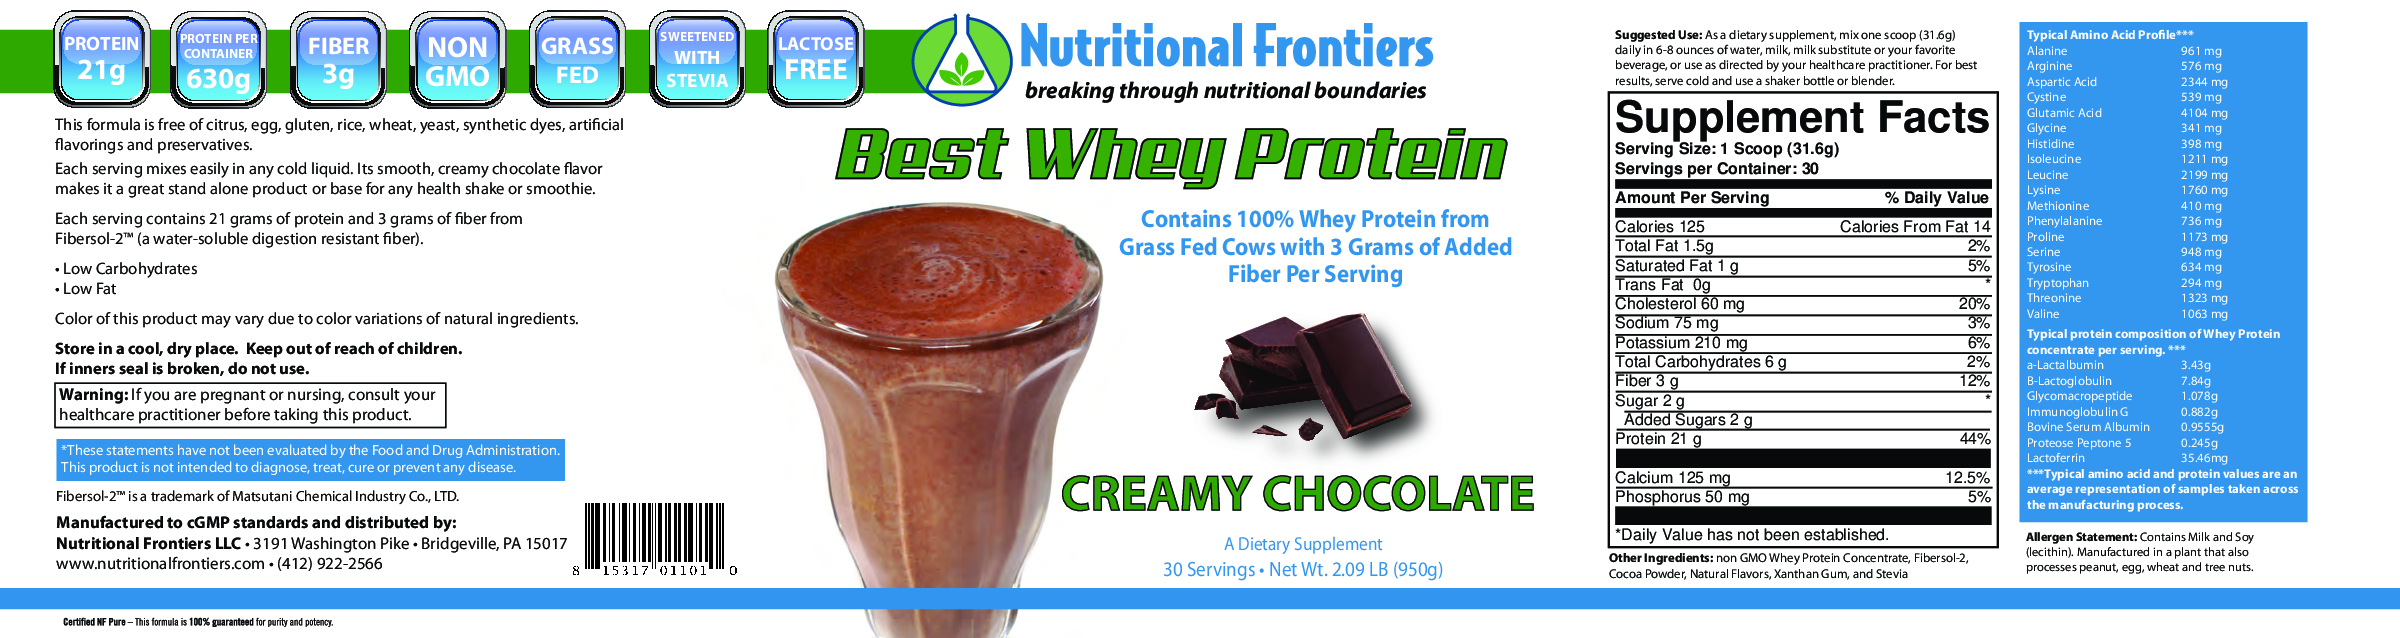 Nutritional Frontiers The Best Whey Chocolate 30 servings